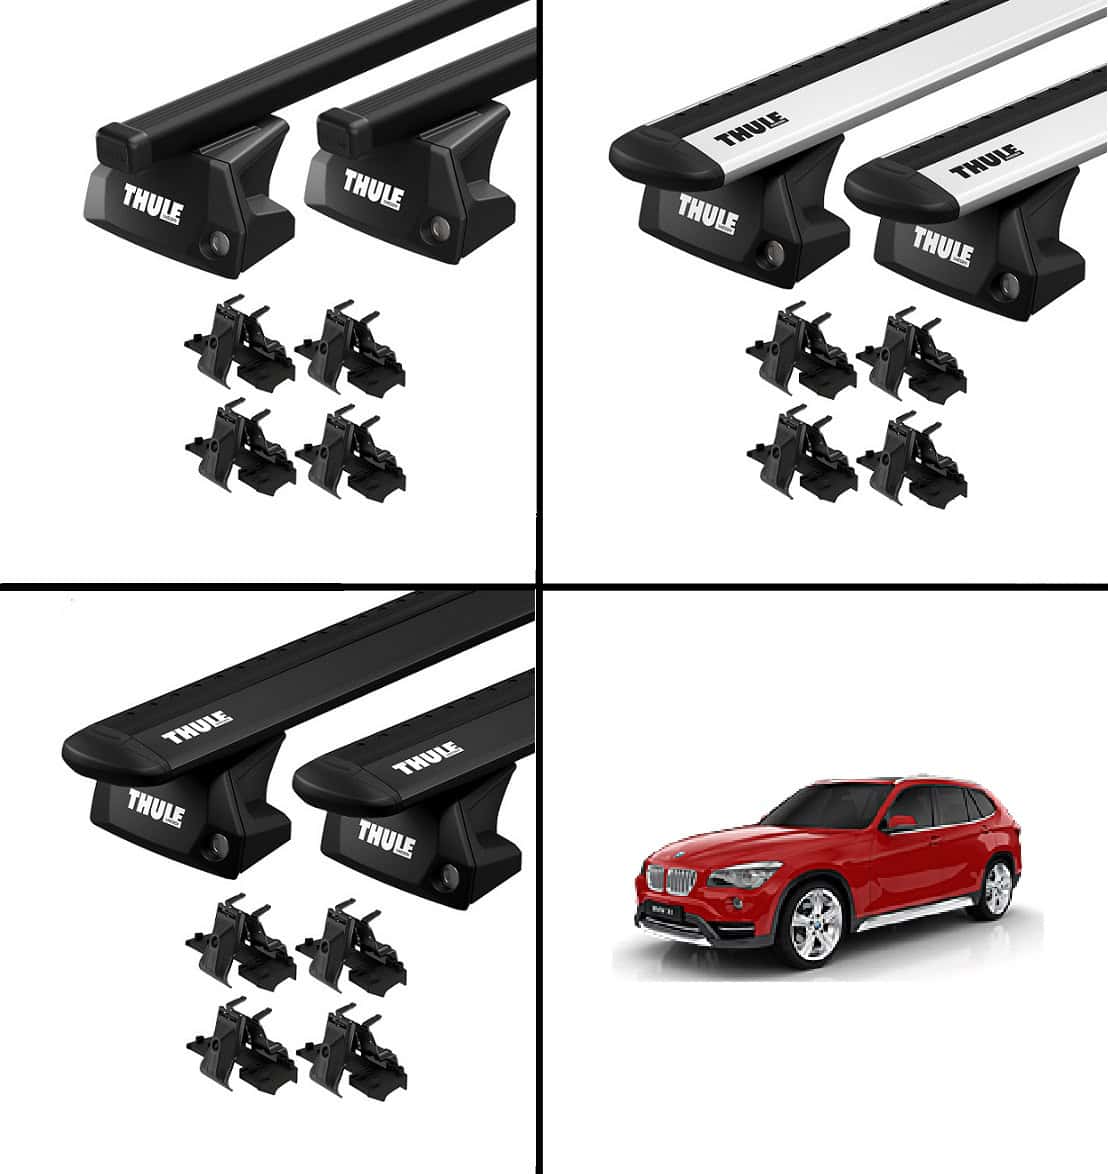 Dachträger BMW X1 E84 2009-2015 mit Reling THULE DIOMA